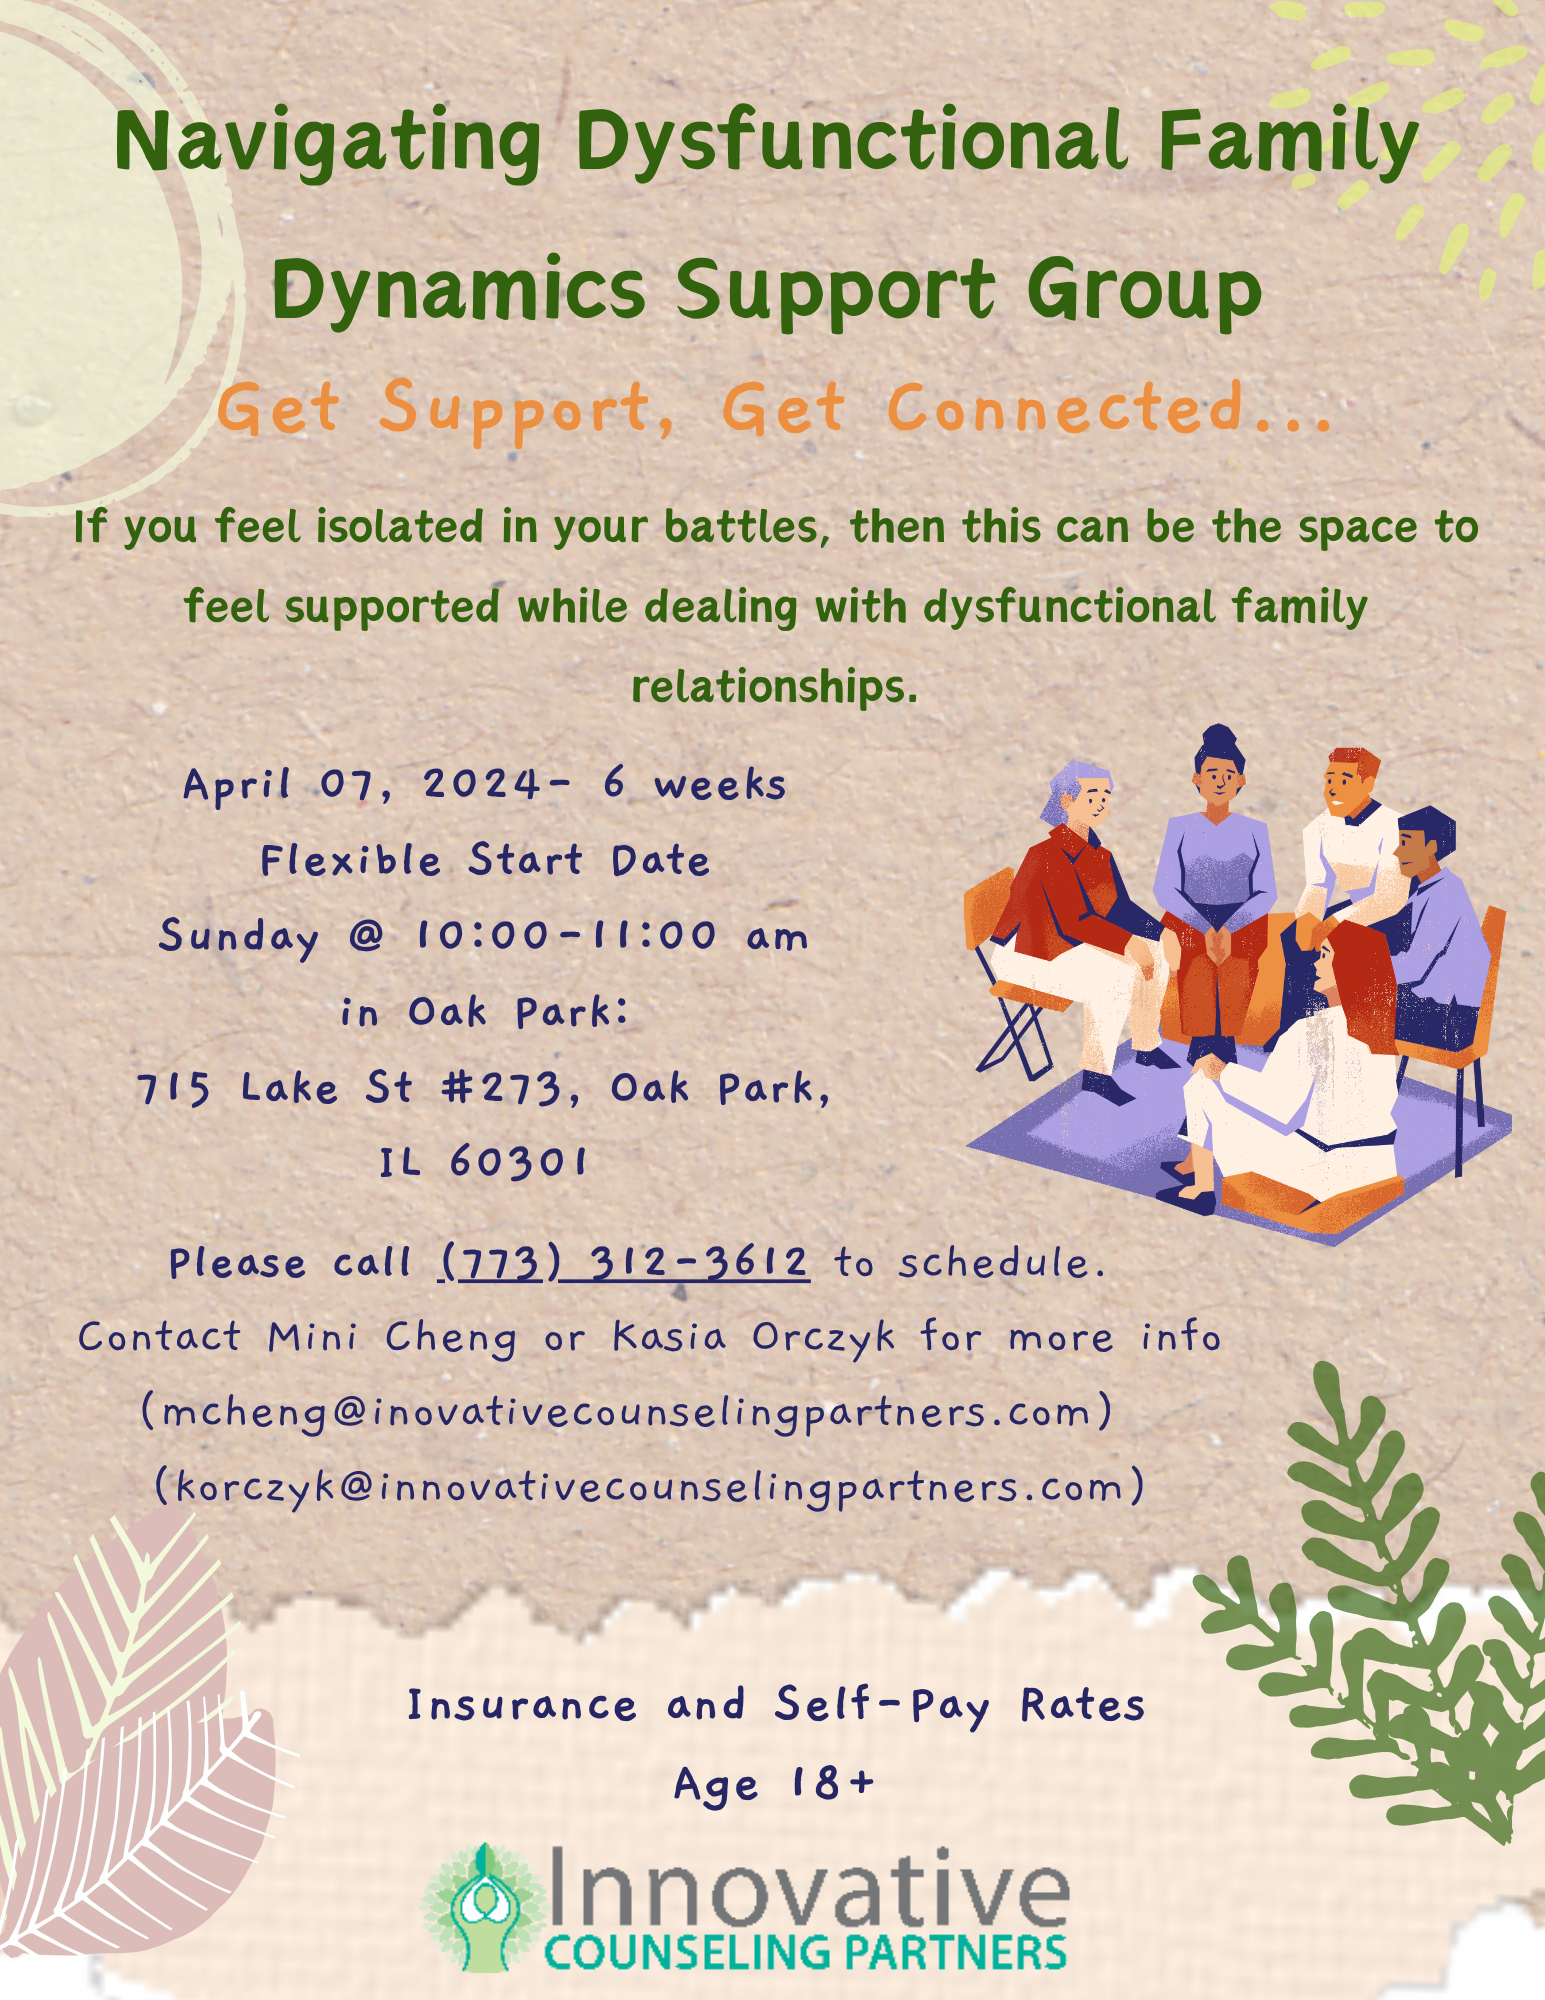 Navigating Dysfunctional Family Dynamics Support Group